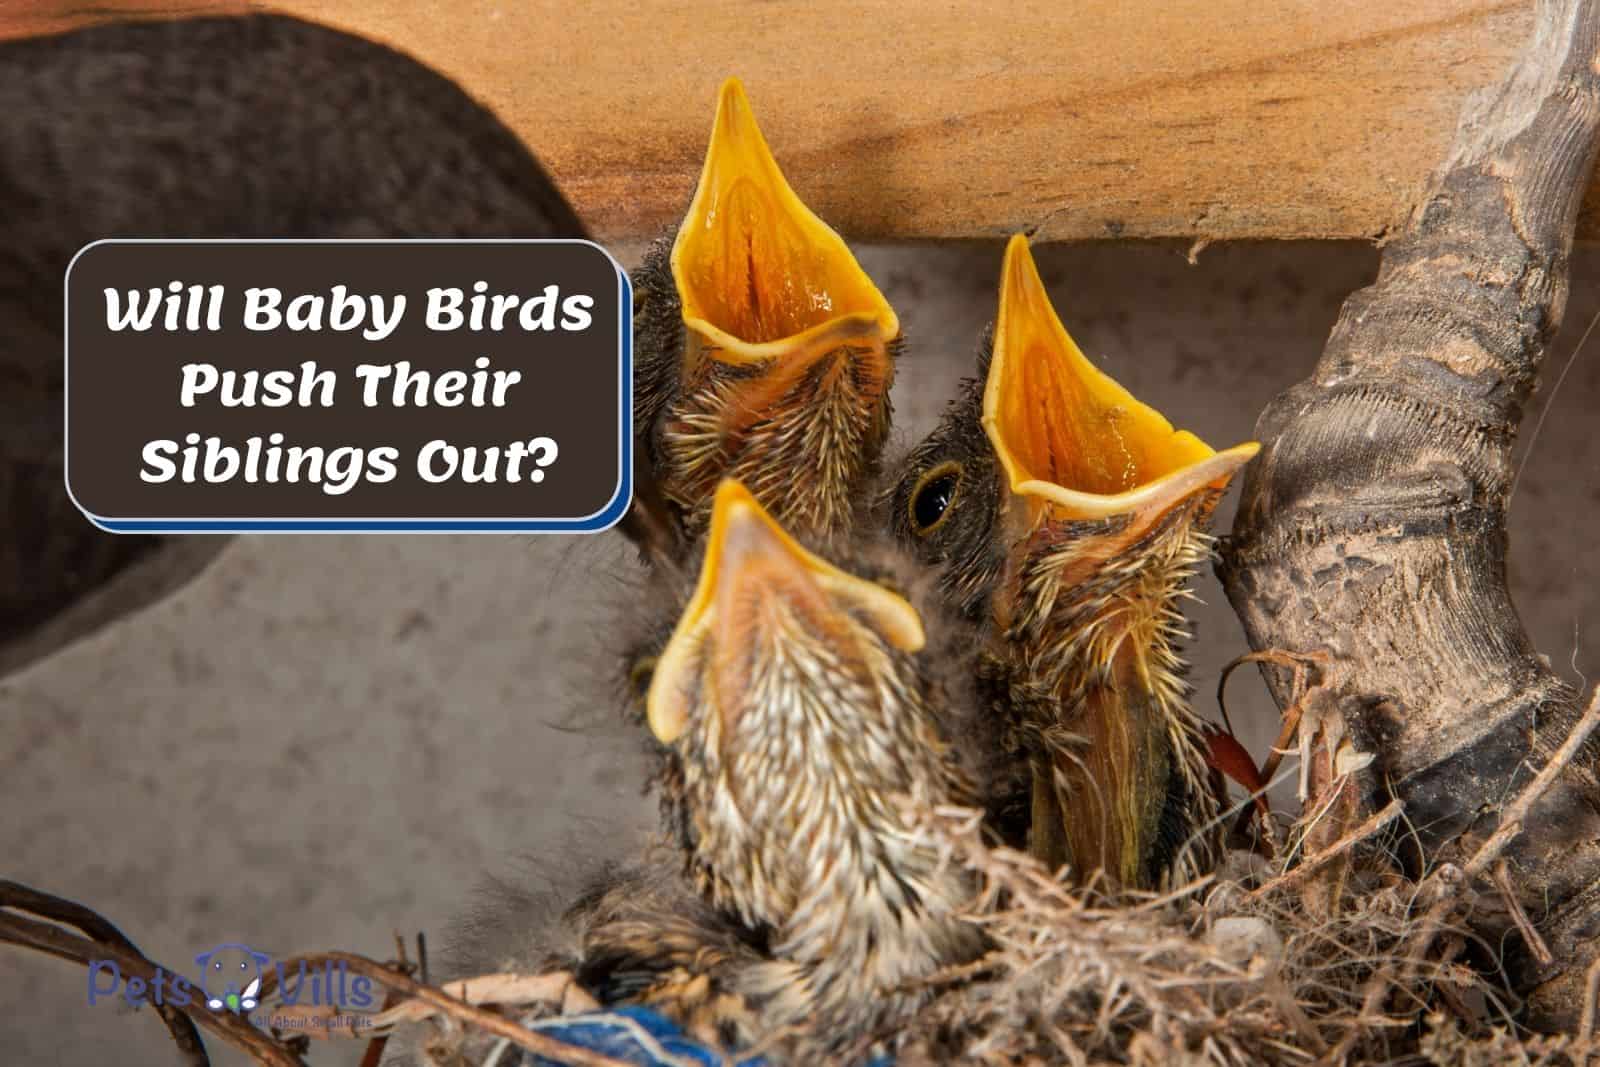 Do Baby Birds Push Their Siblings Out of the Nest